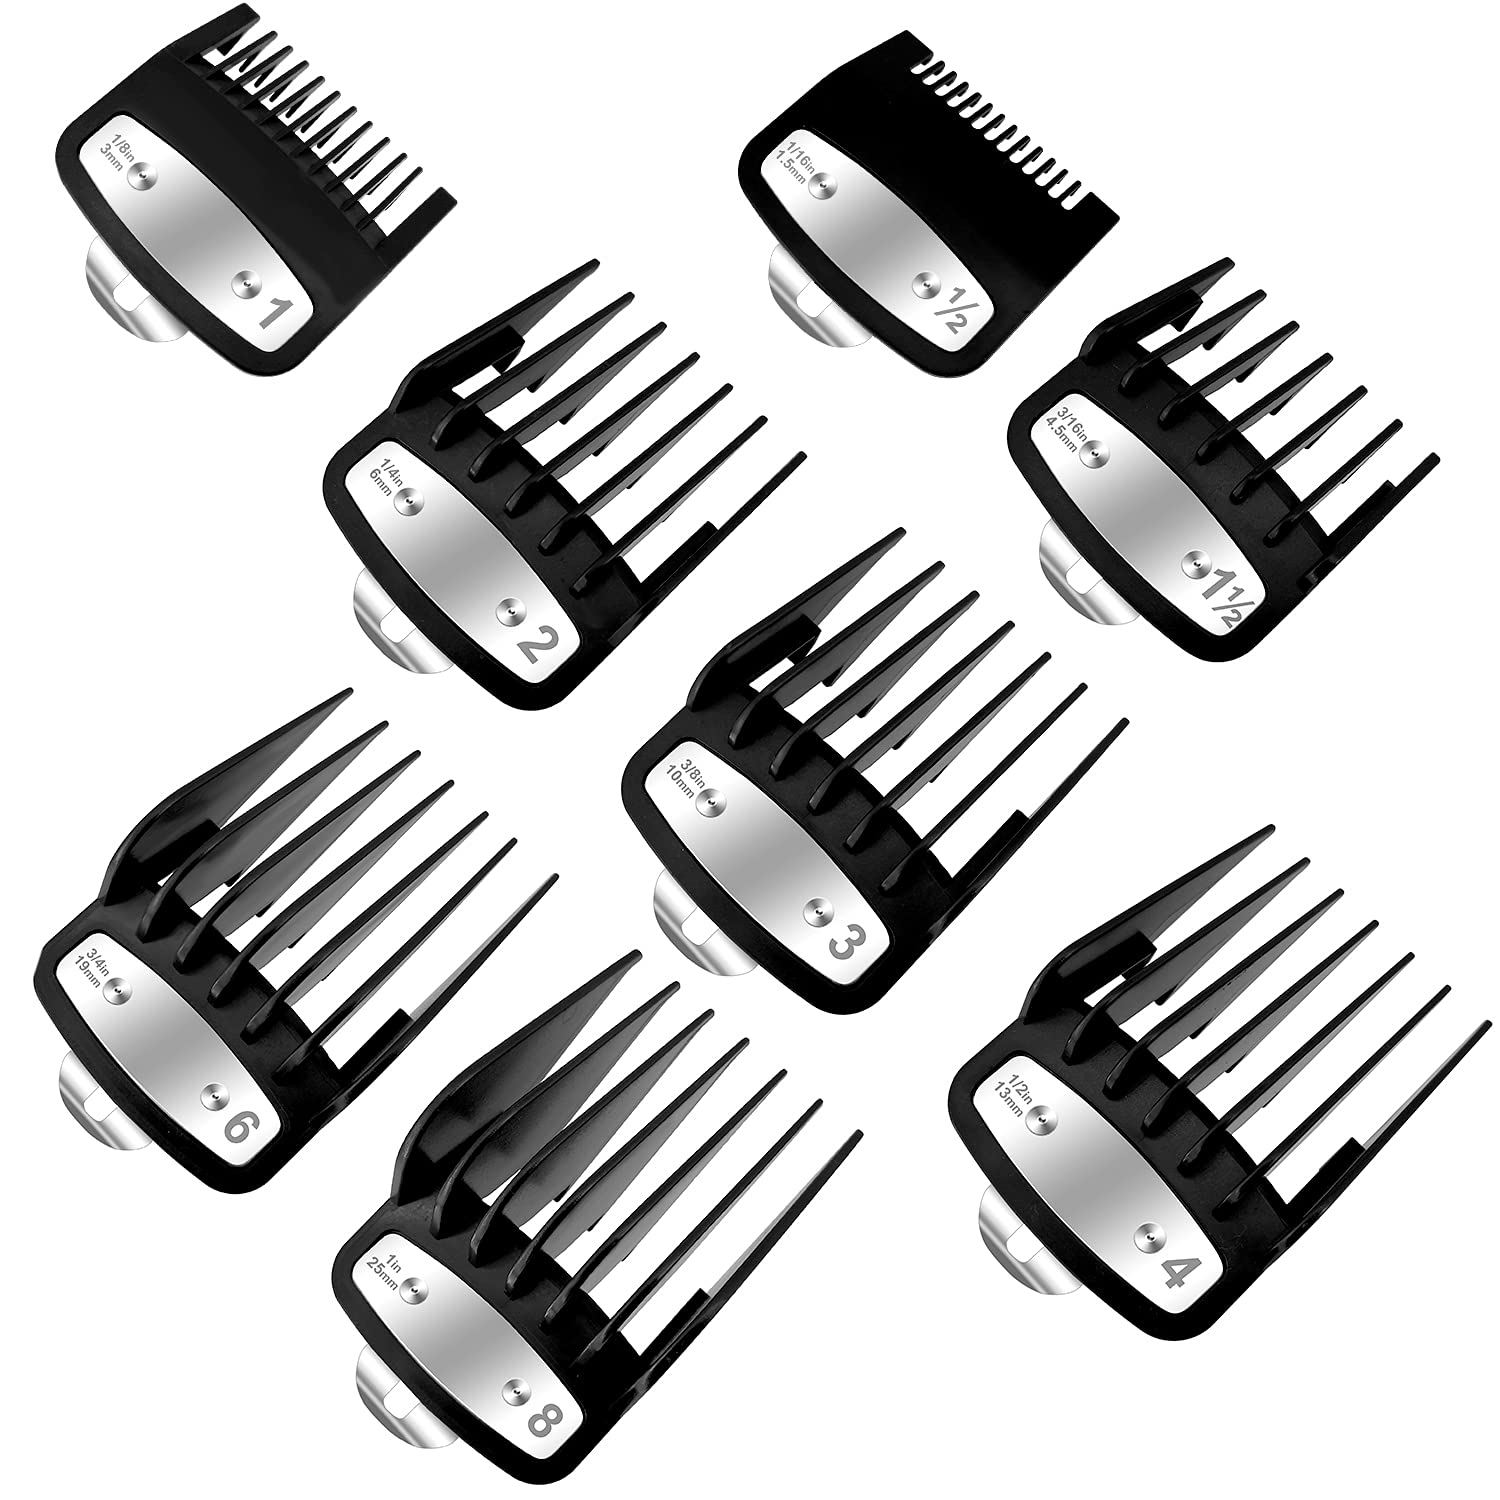 Mua Professional Hair Clipper Guards for Wahl,8 Pcs Hair Cutting Guide Combs  Set with Metal Clip Compatible with Wahl Clippers(Black) trên Amazon Mỹ  chính hãng 2023 | Giaonhan247